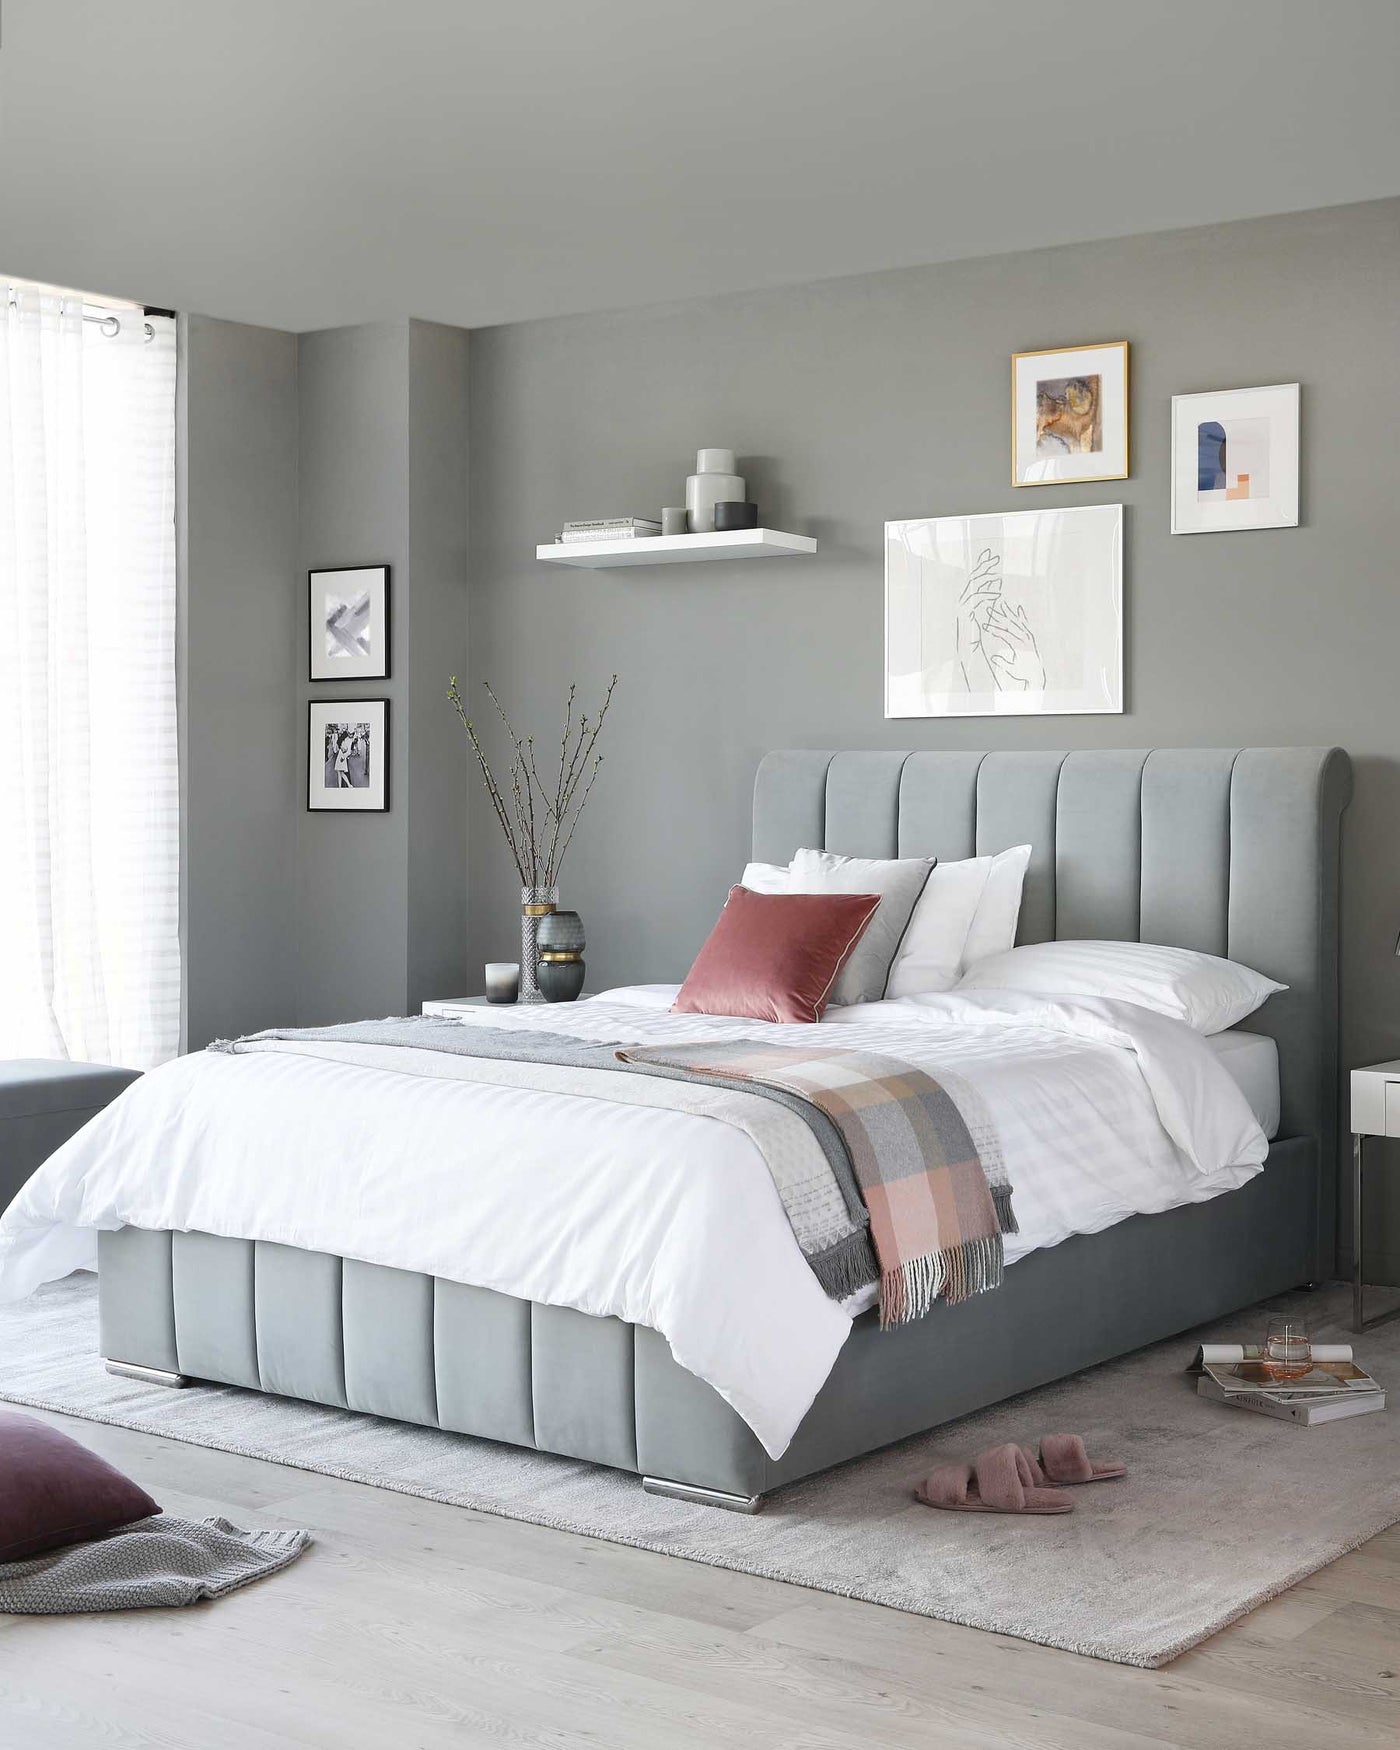 Elegant grey upholstered platform bed with a large, plush, channel-tufted headboard. The bed is dressed in crisp white bedding with accent pillows and a multi-coloured throw blanket. A minimalist white floating shelf is mounted above the bed.